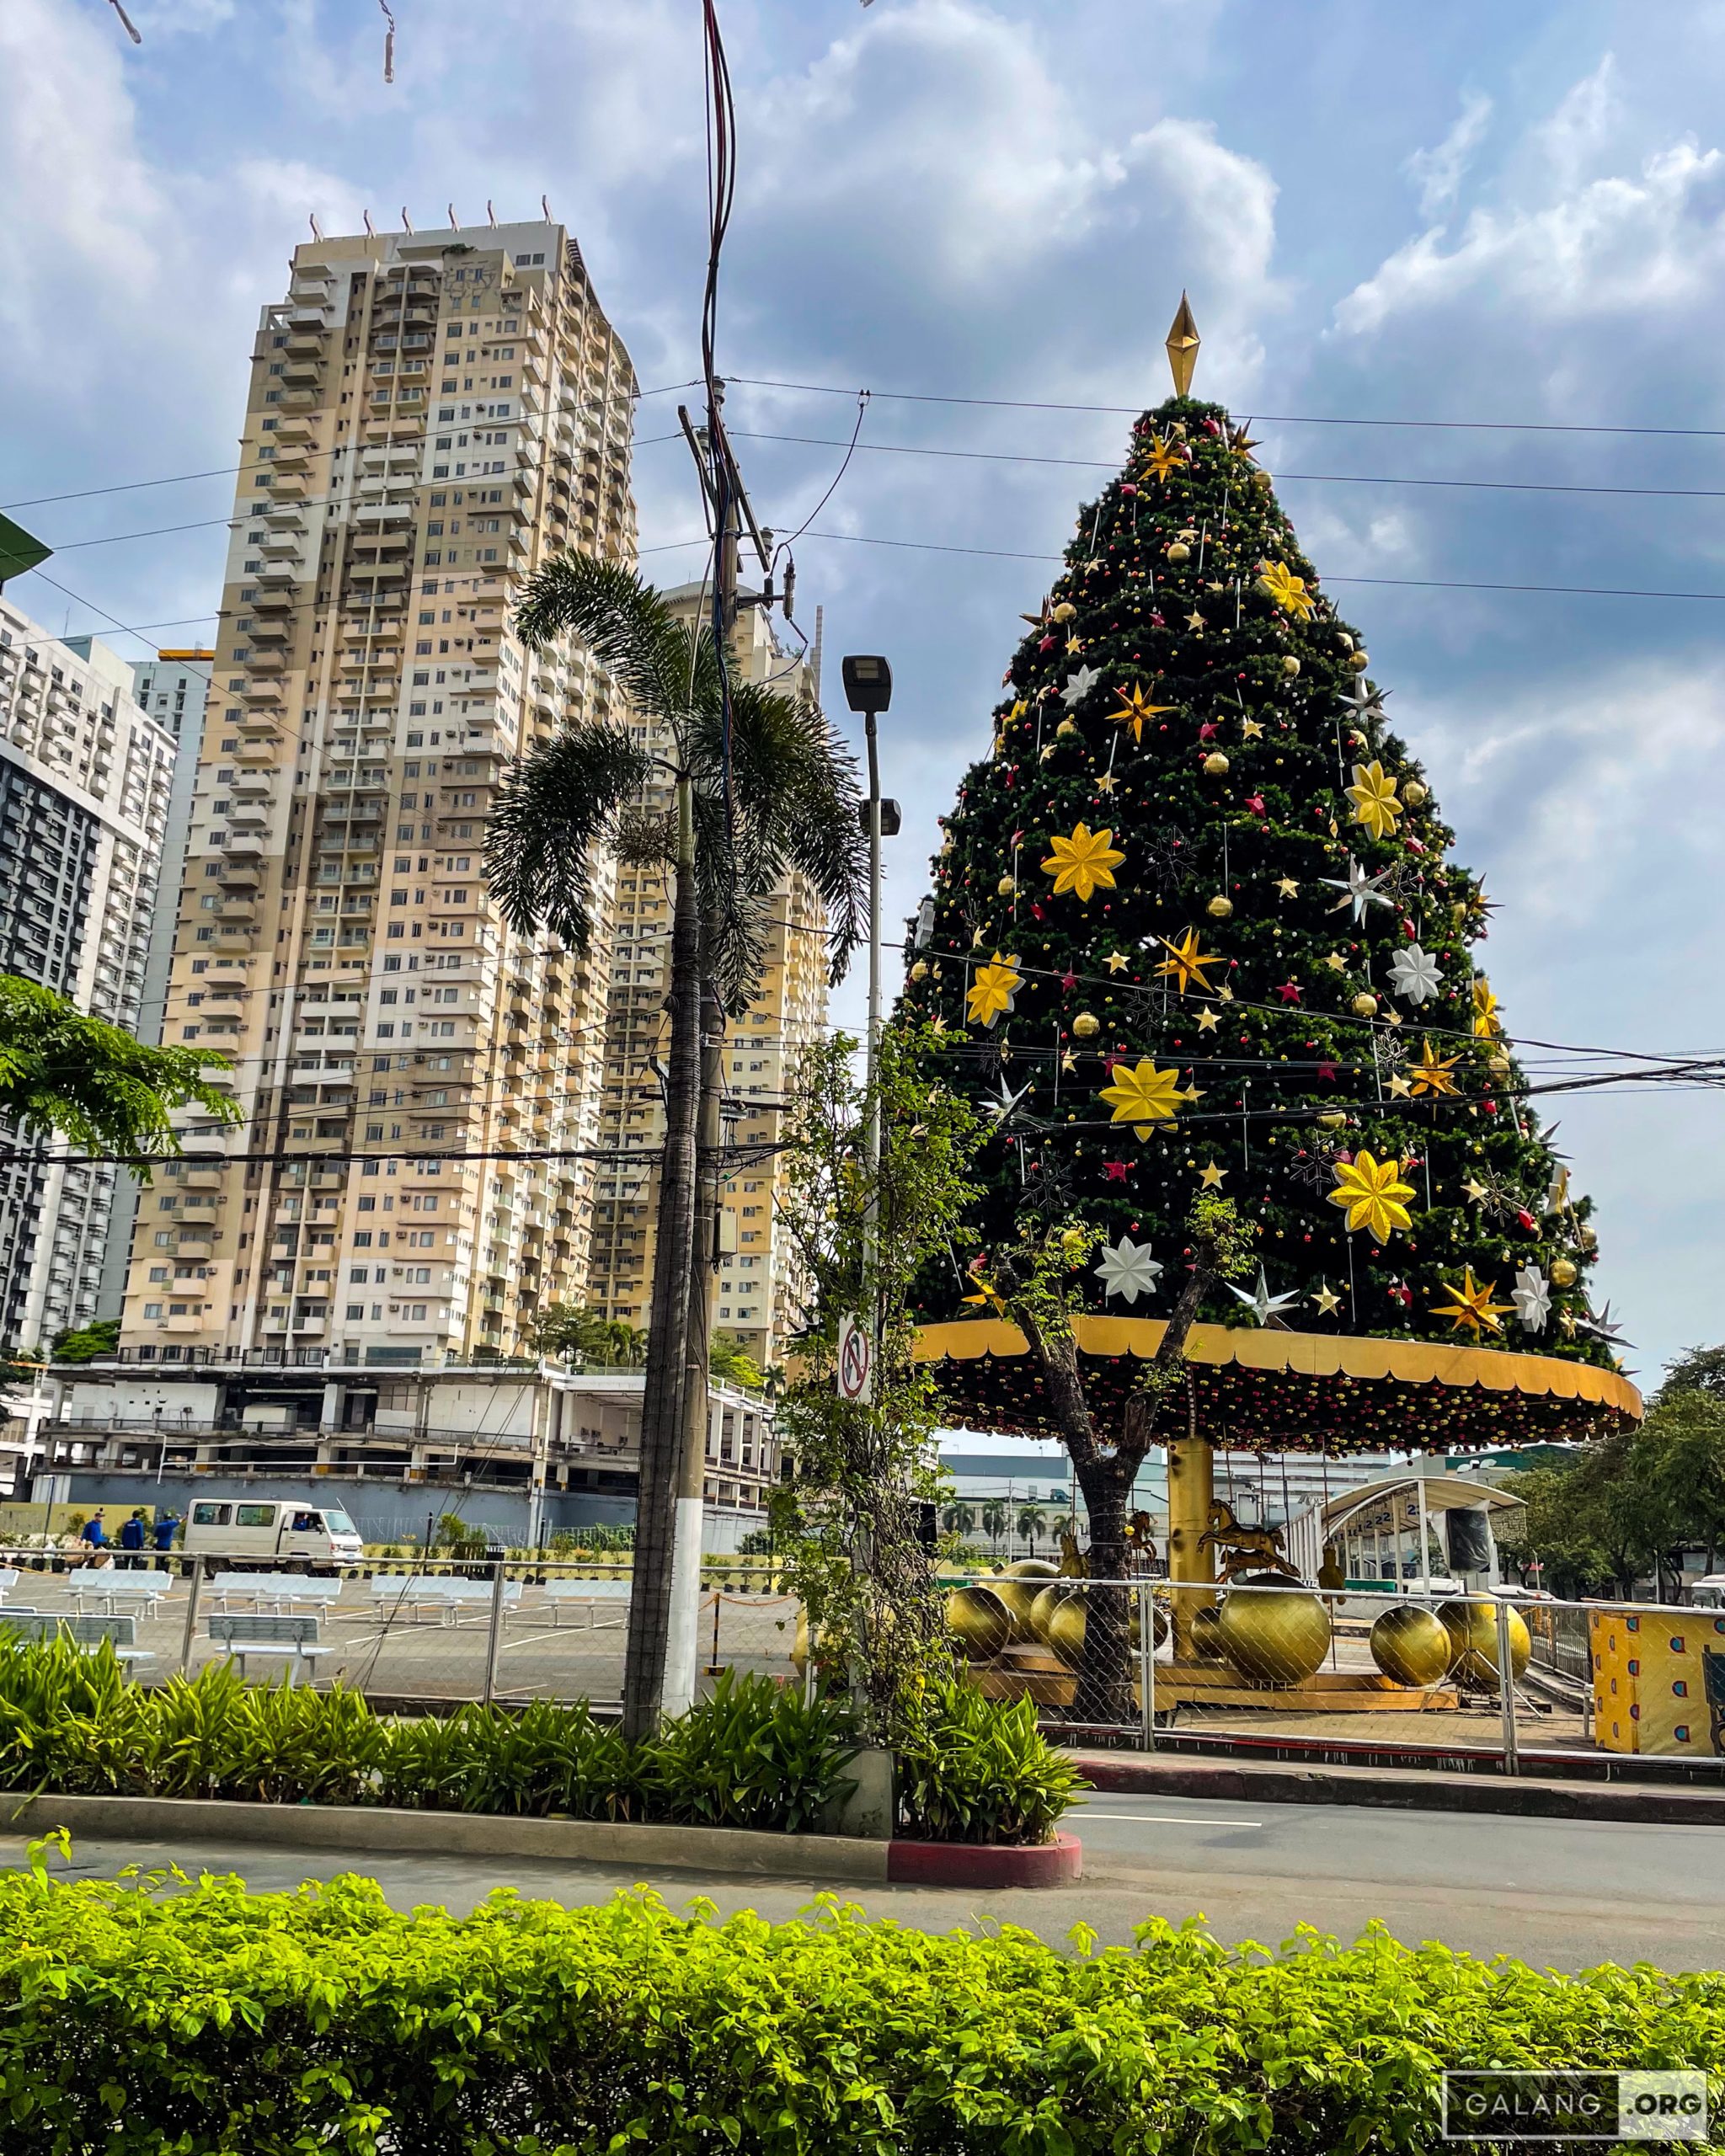 The Christmas tree at the corner of Times Square Street and General Roxas Avenue, Cubao area.